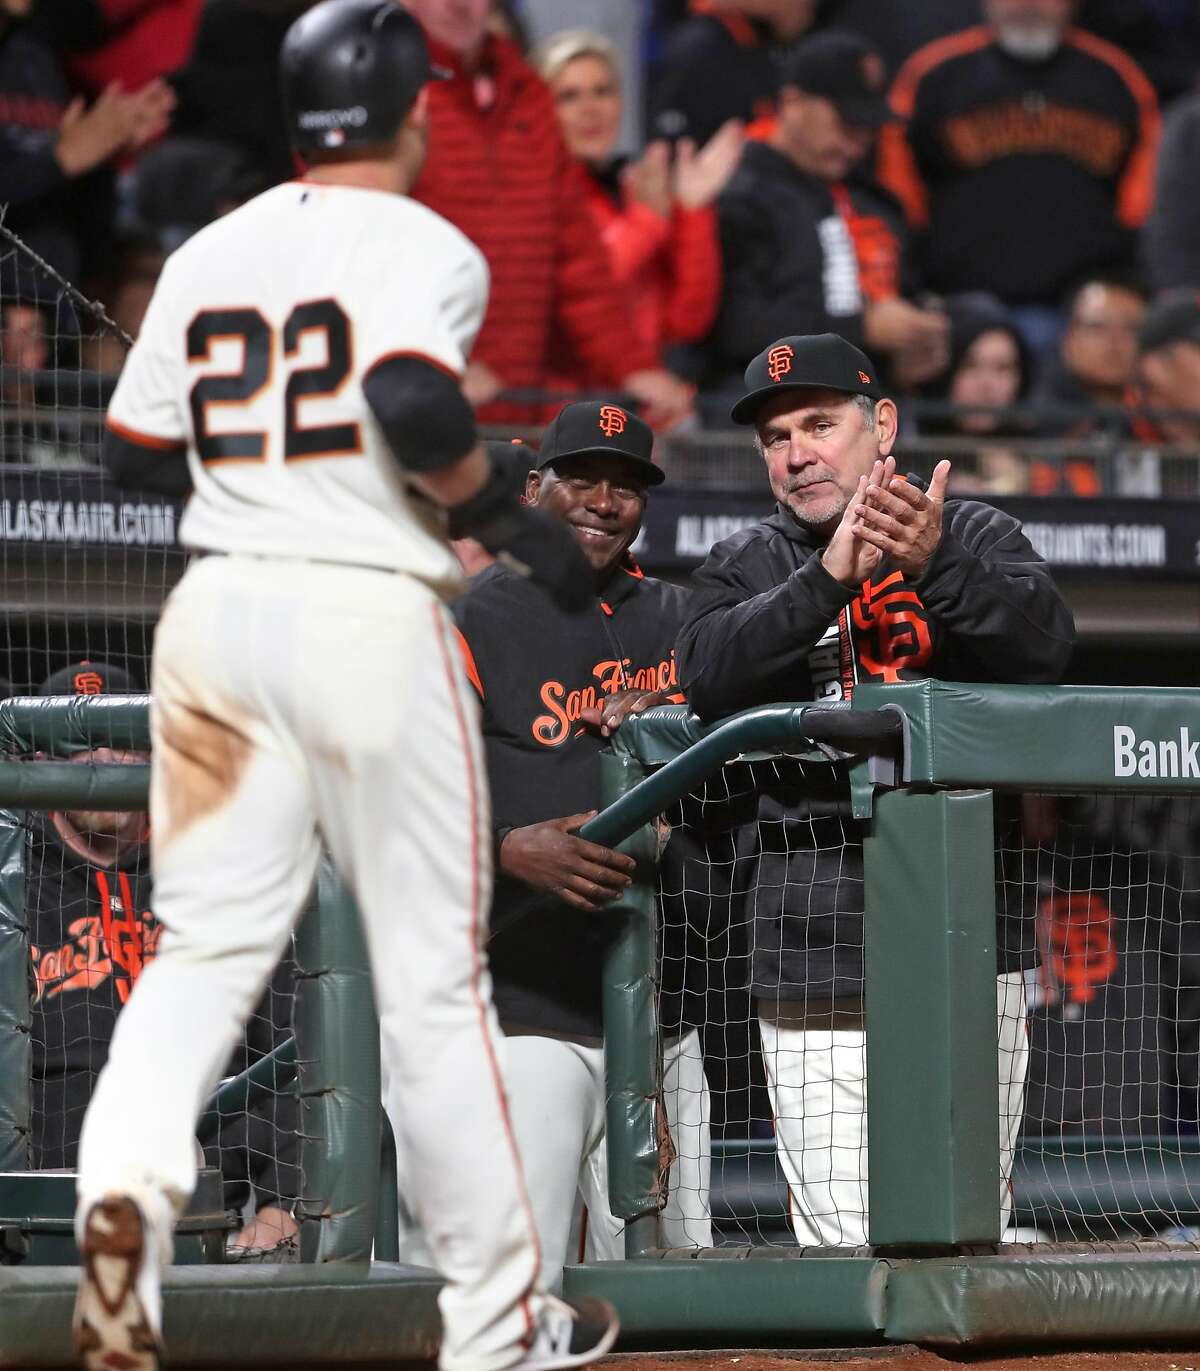 San Francisco Giants' manager Bruce Bochy and batting coach Hensley Muelens welcome Christian Arroyo back to the dugout after he scored on Mac Williamson's RBI single in 6th inning against Los Angeles Dodgers during MLB game at AT&T Park in San Francisco, Calif., on Monday, May 15, 2017.